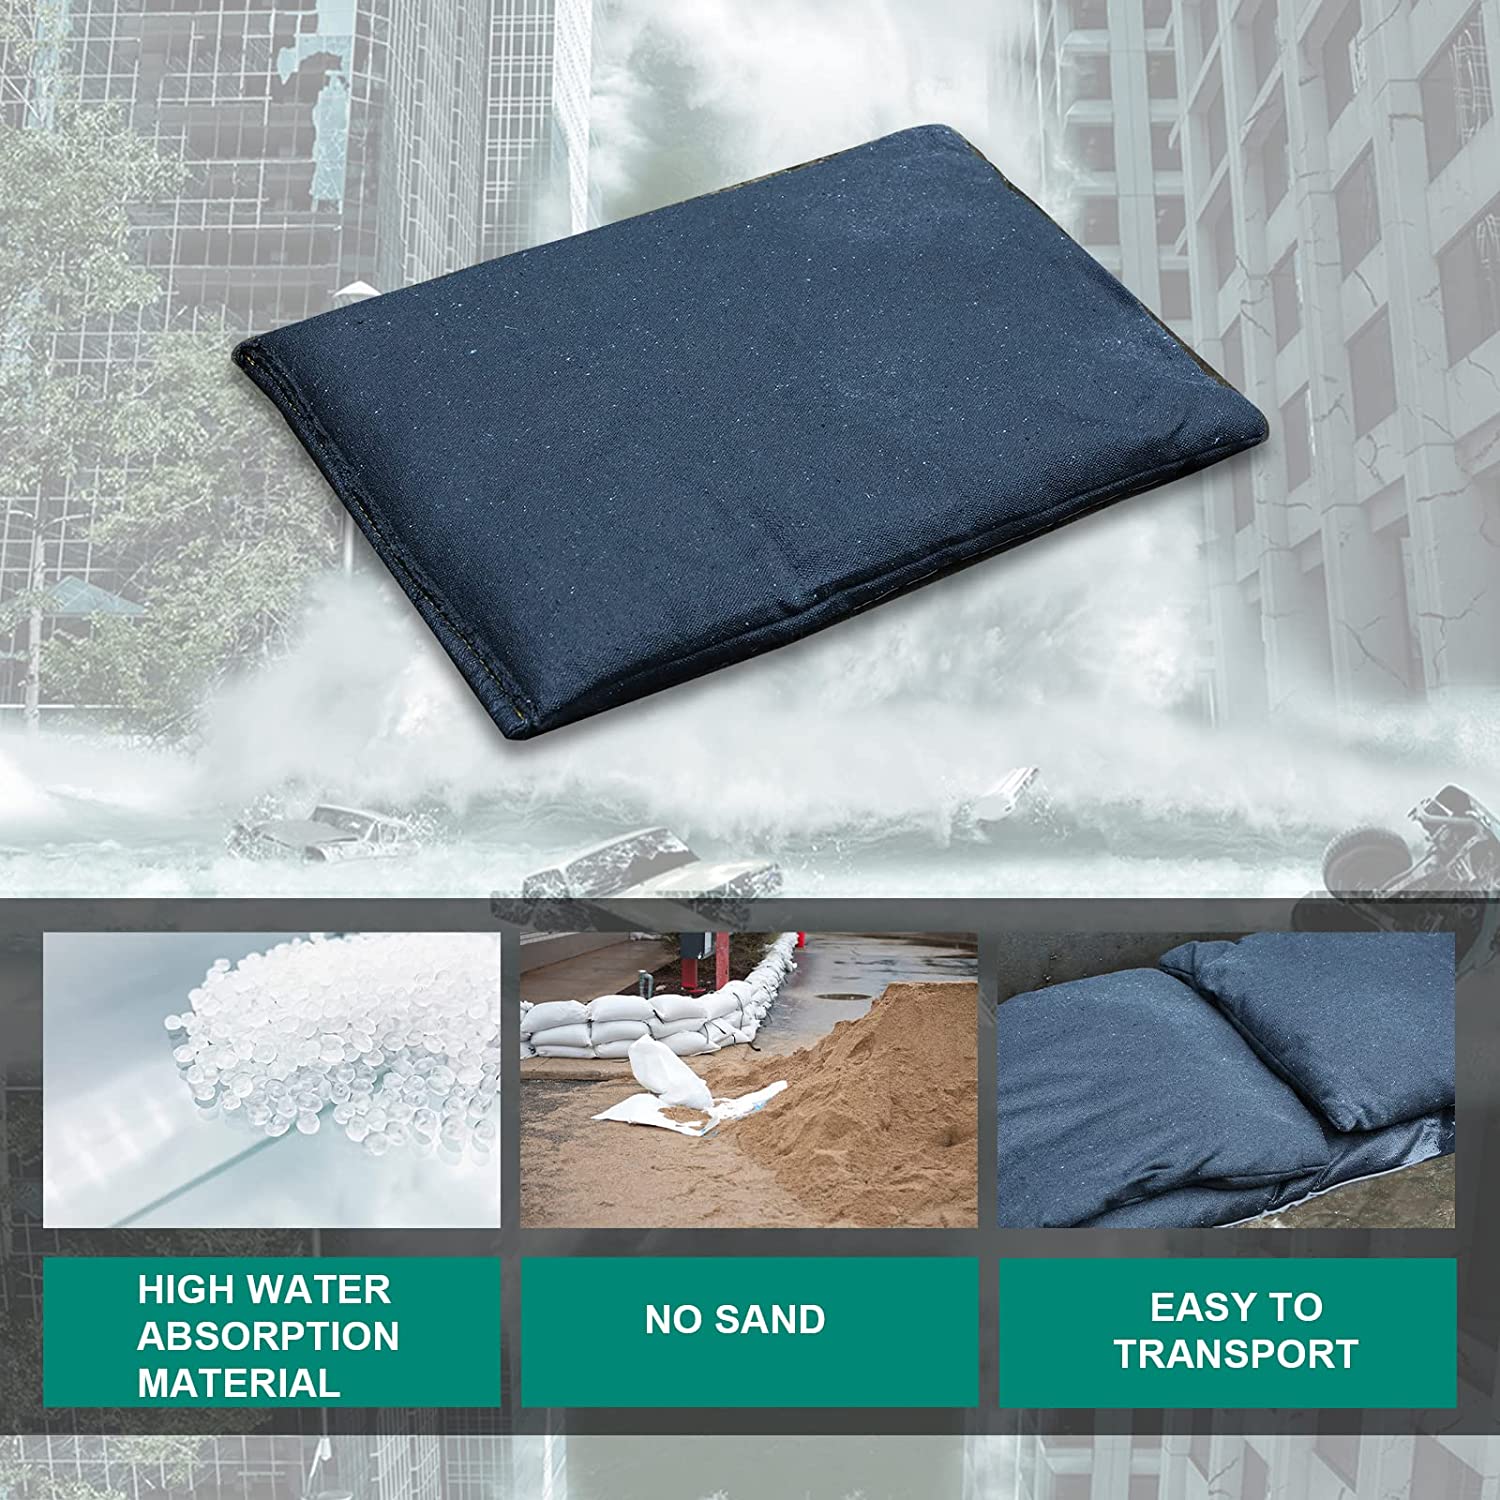 Absorbing Water Inflation Bag